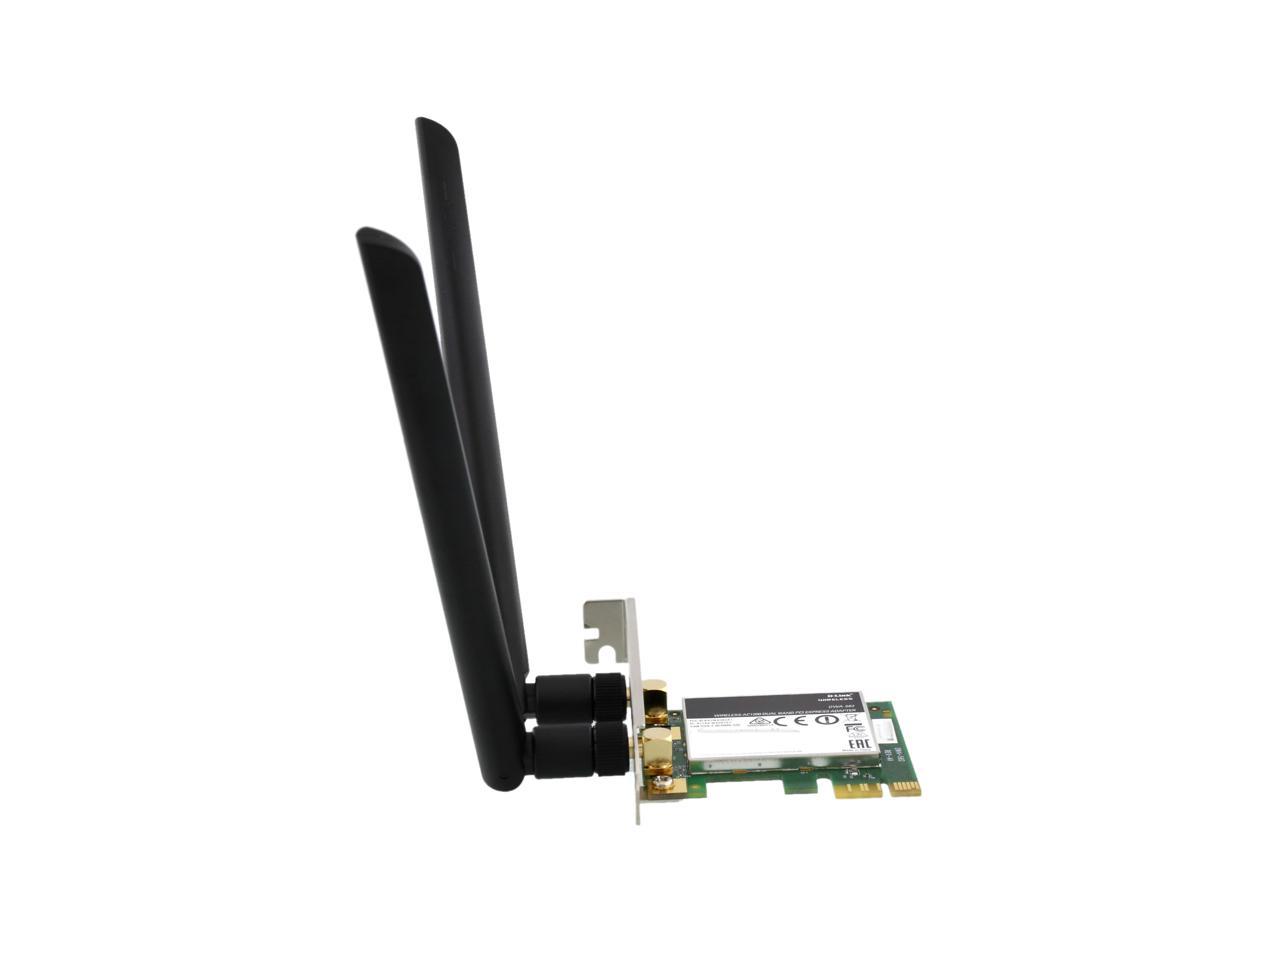 D-link dwa-582 wireless ac1200 driver download antivirus free download for windows 7